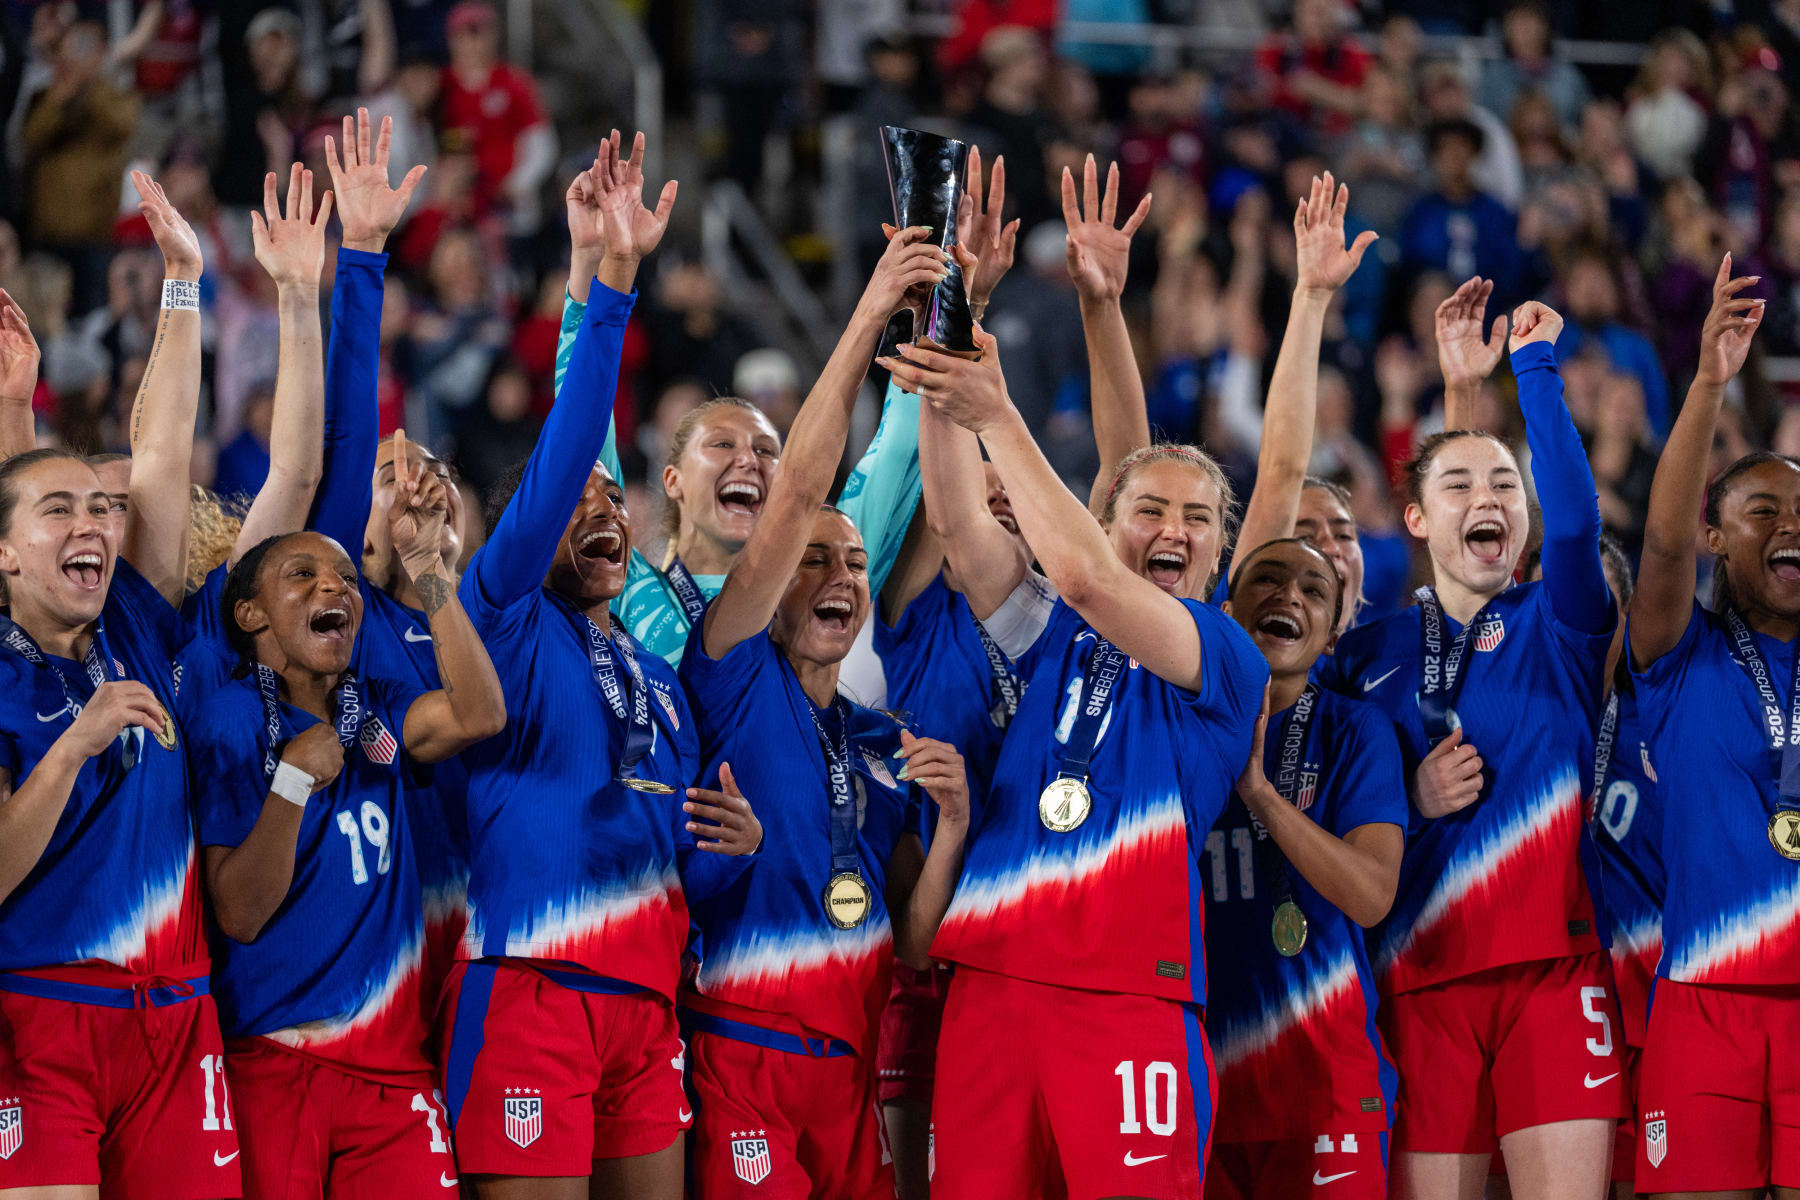 USA and Mexico Decide Not to Pursue Hosting 2027 FIFA Women’s World Cup, Shift Focus to 2031 Tournament